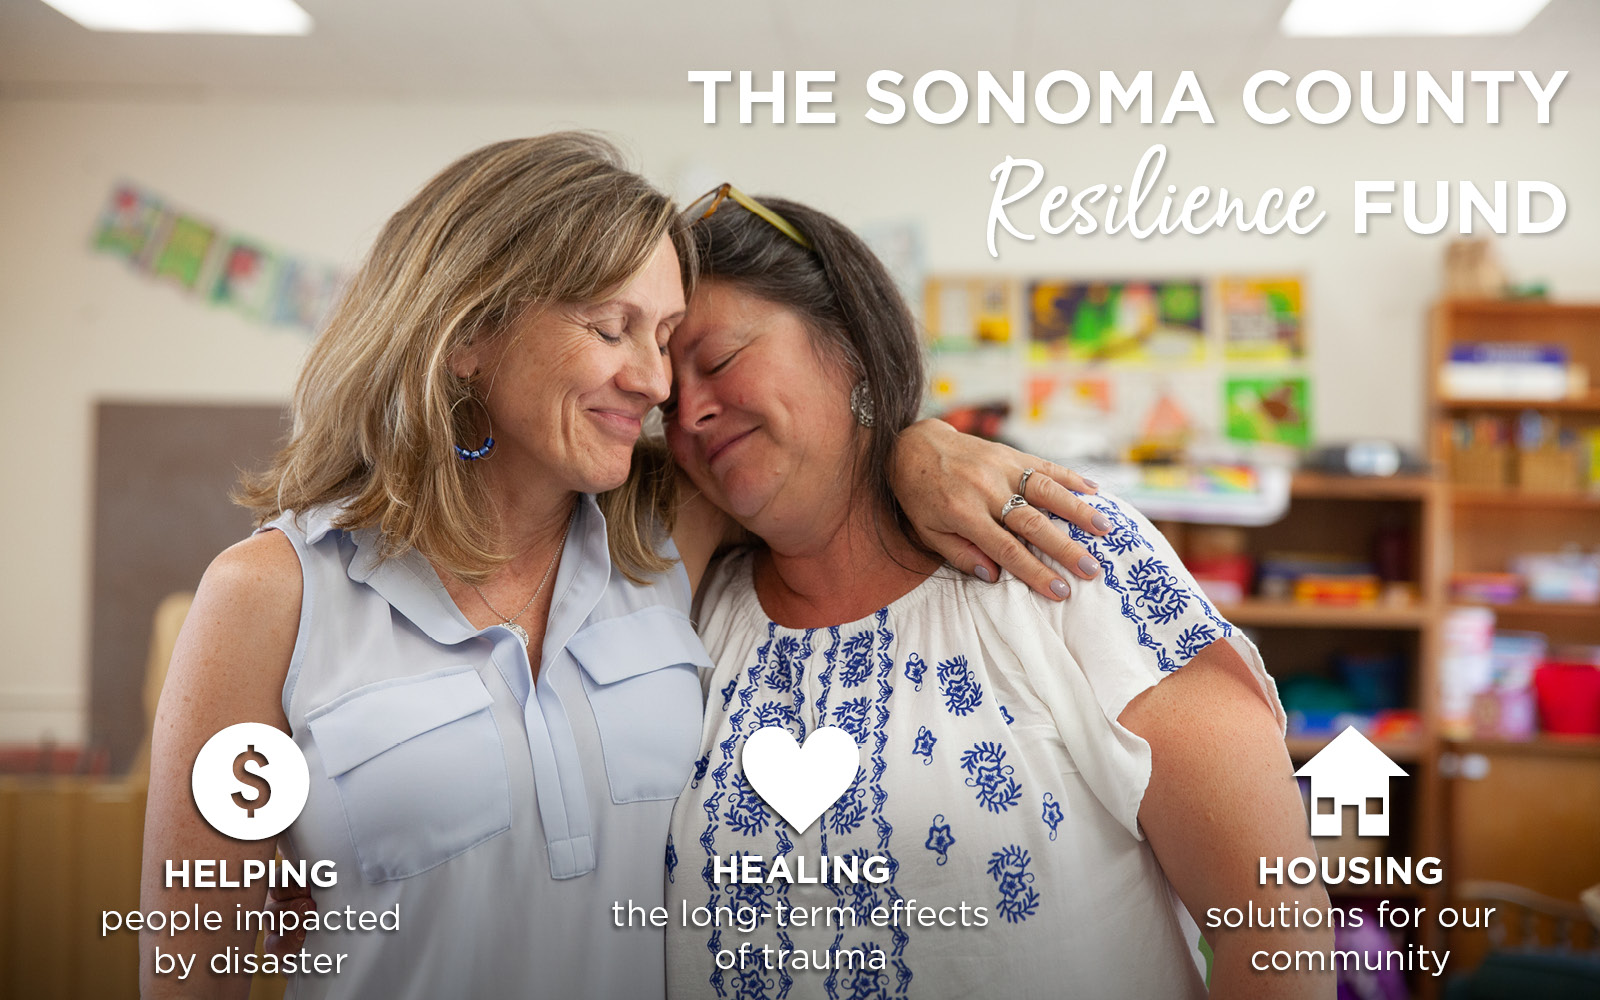 The Sonoma County Resilience Fund